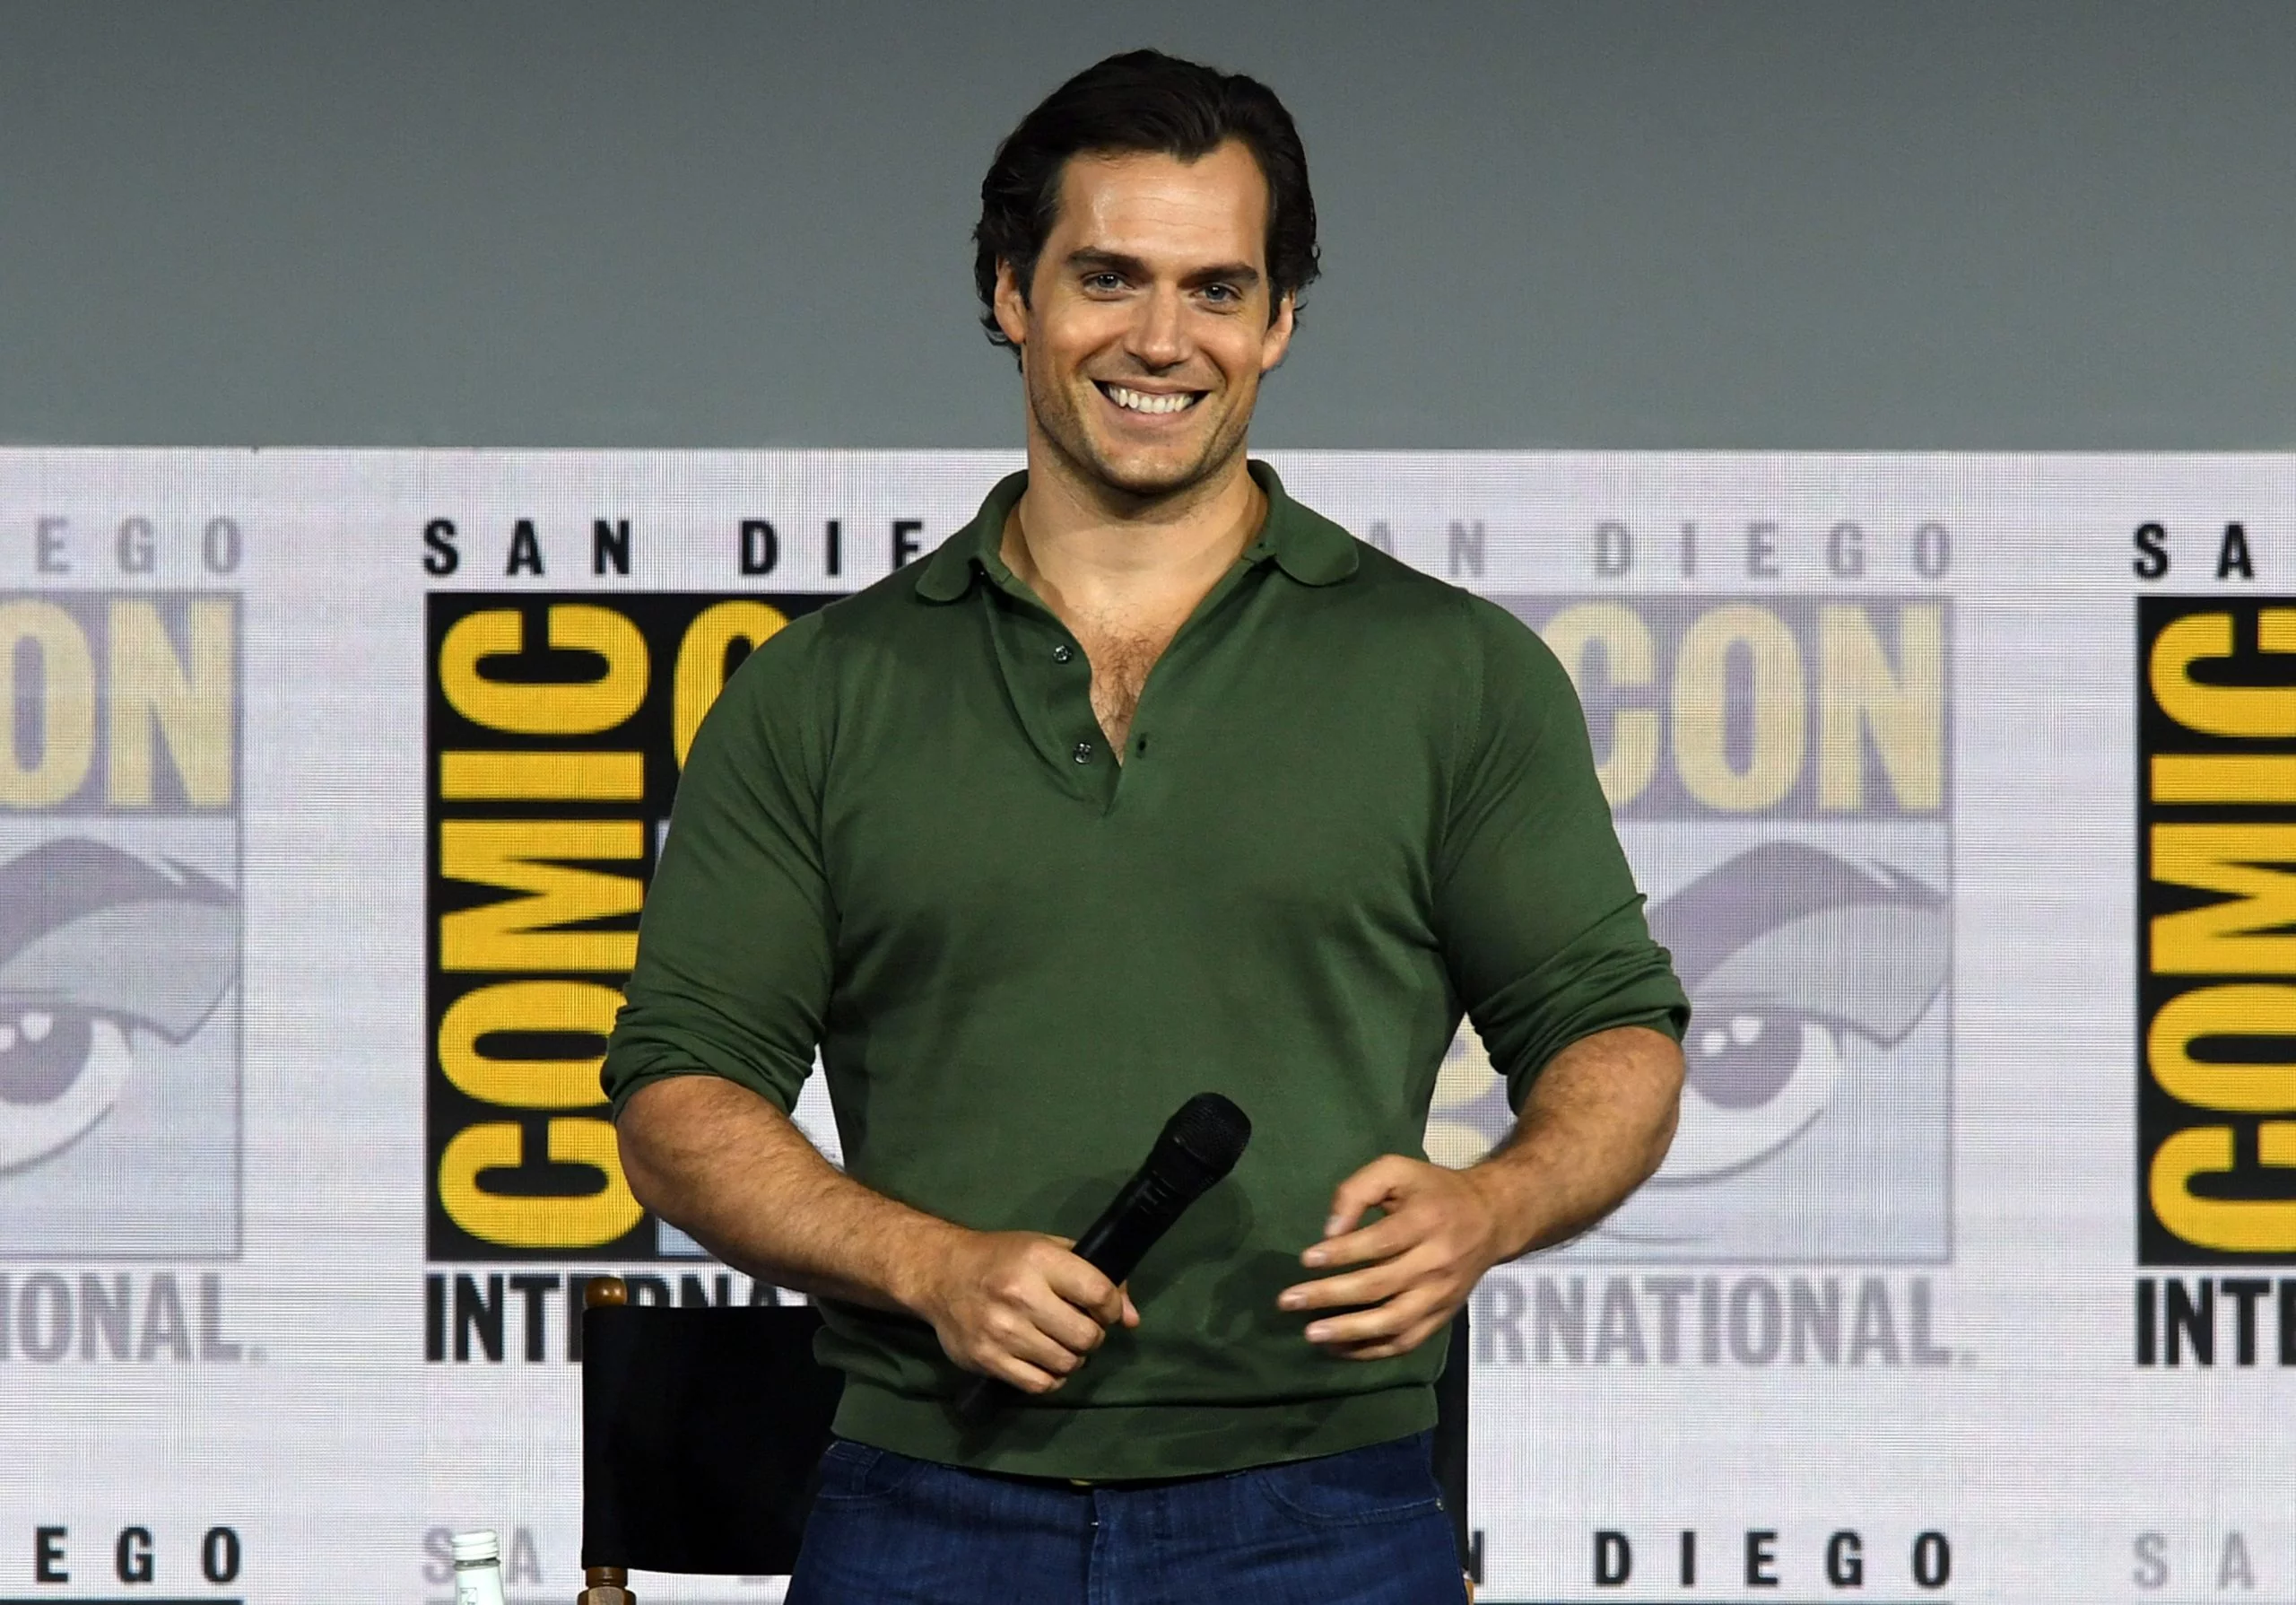 Captain Marvel 2' Rumored To Feature Henry Cavill As Wolverine